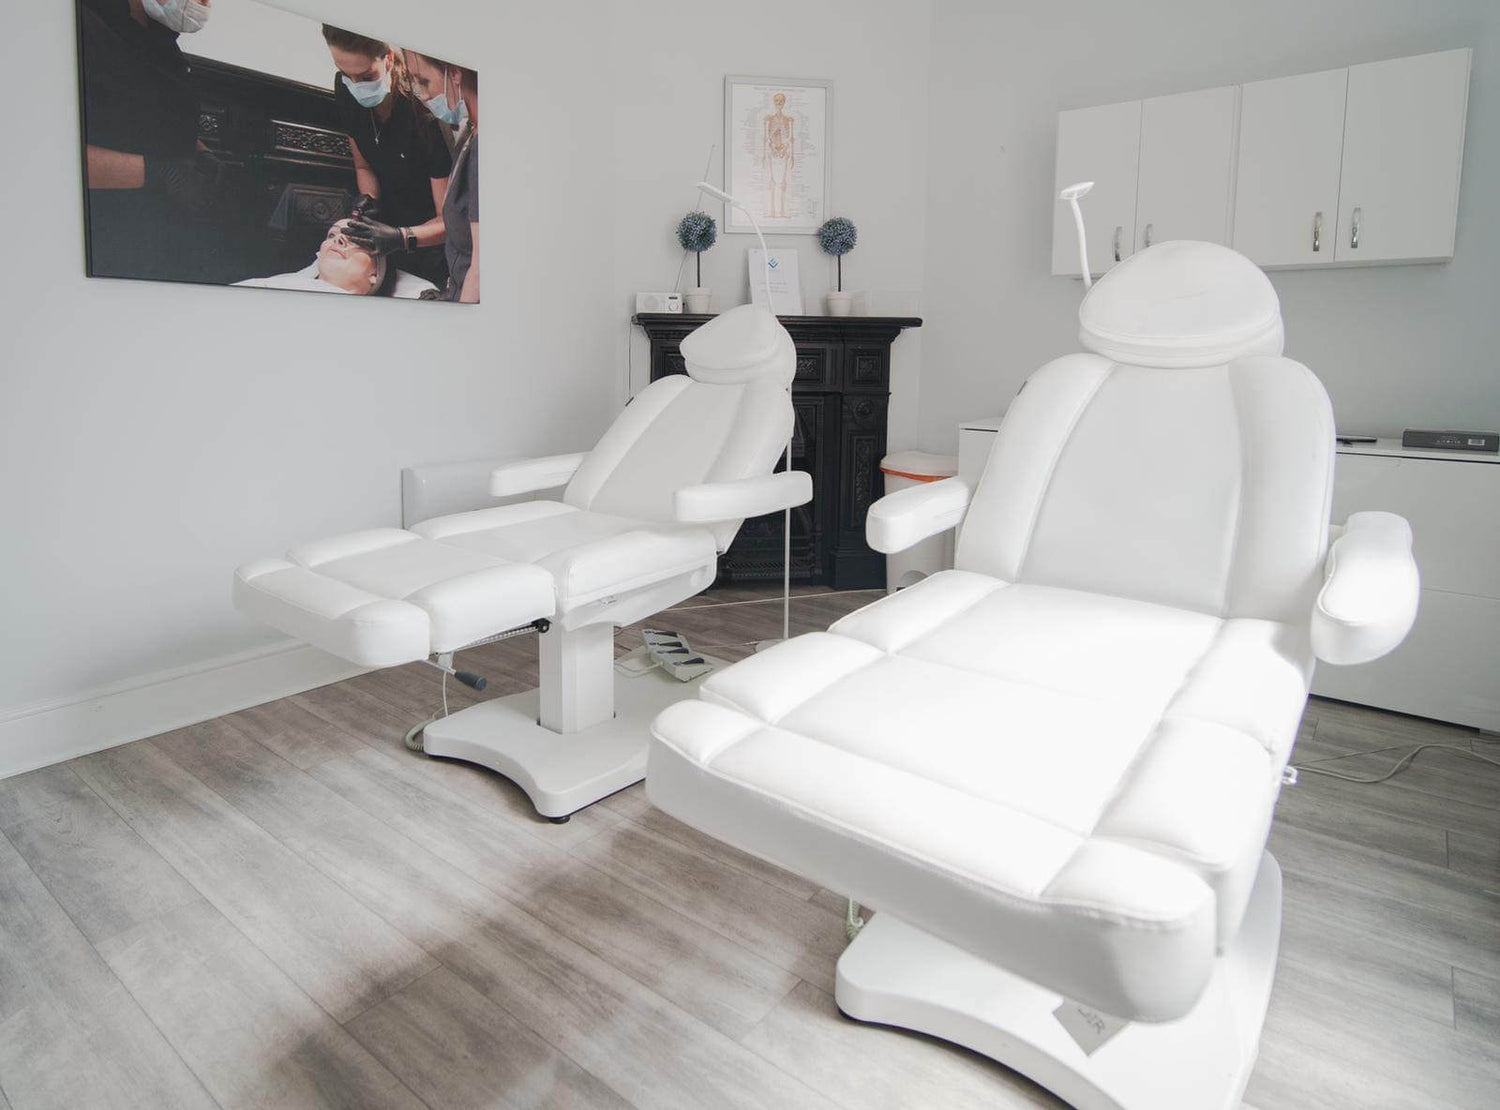 A view of Empire's comfortable chairs for Aesthetics treatments to take place